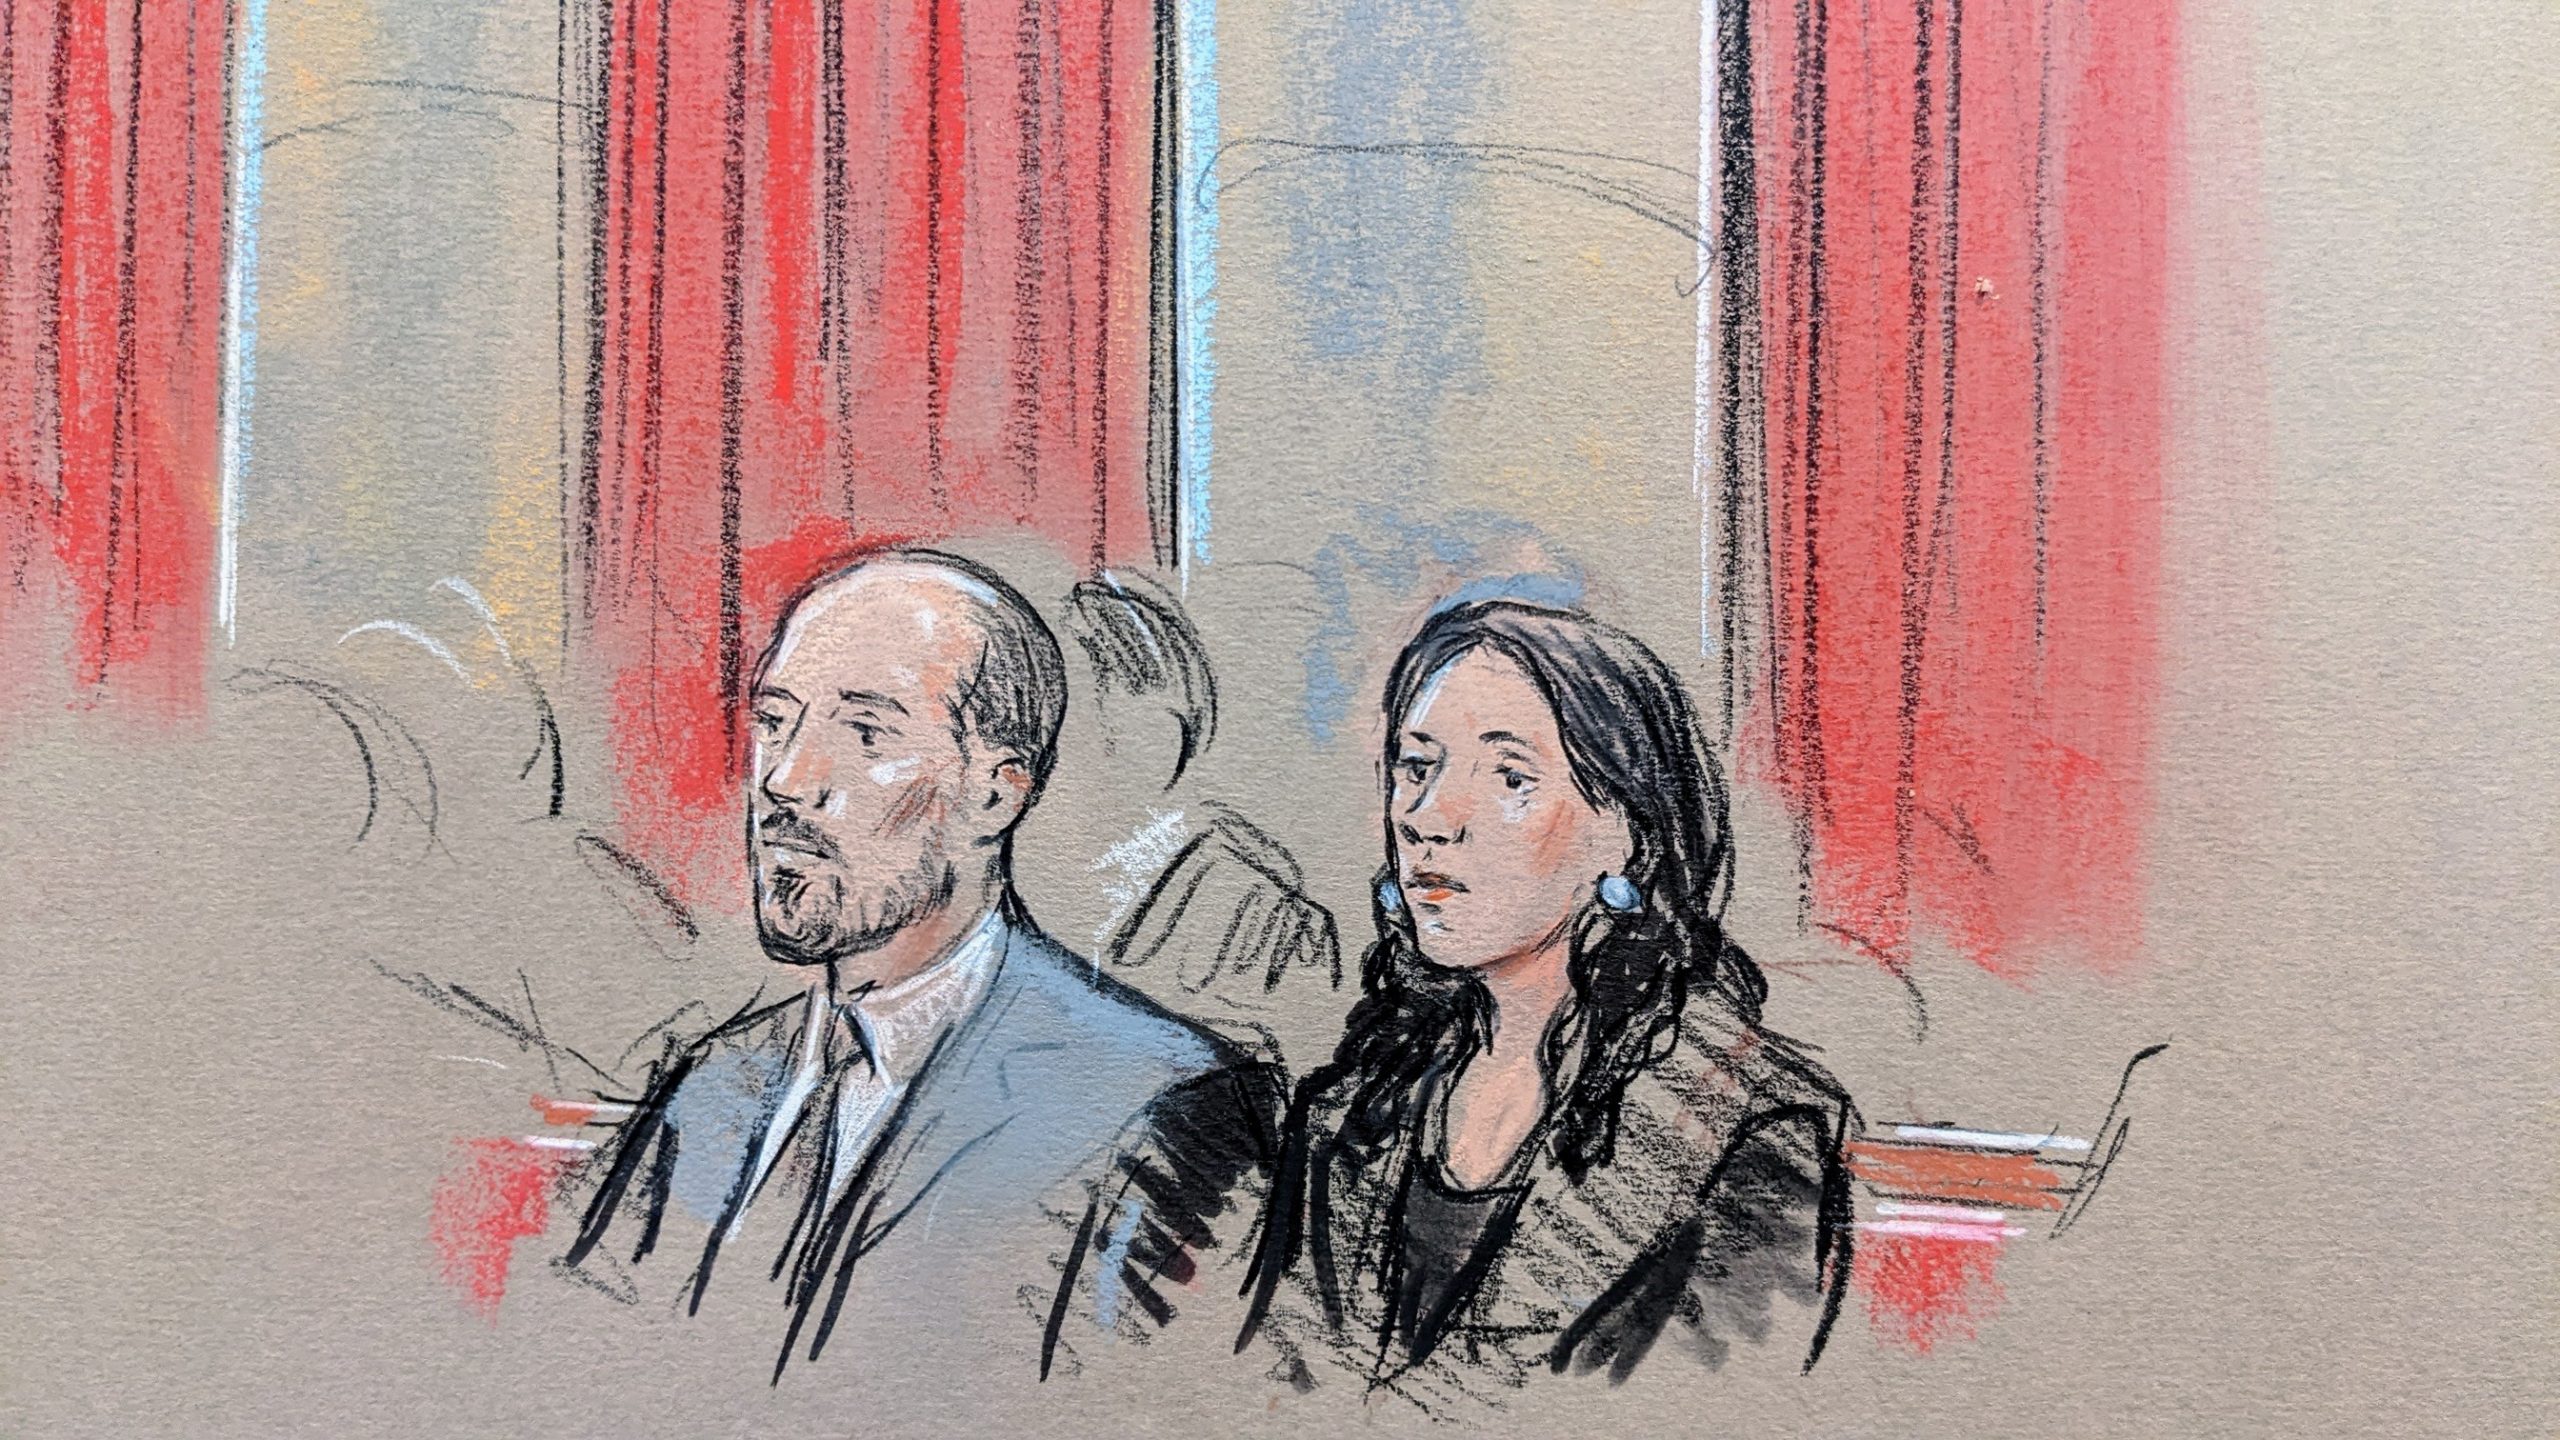 Sketch of man and woman sitting in the courtroom.